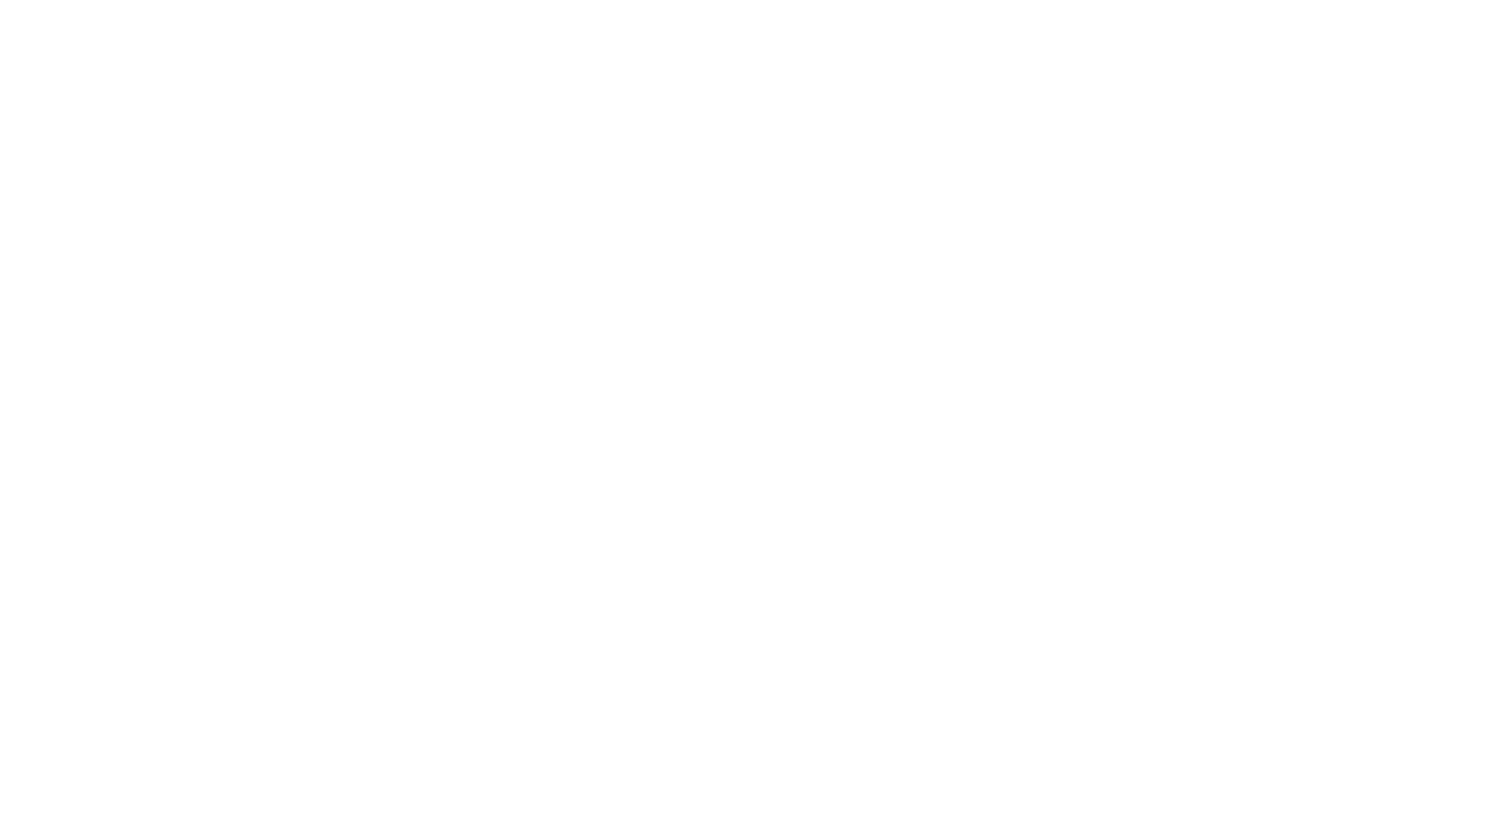 CLASSICAL TO JAZZ PIANO